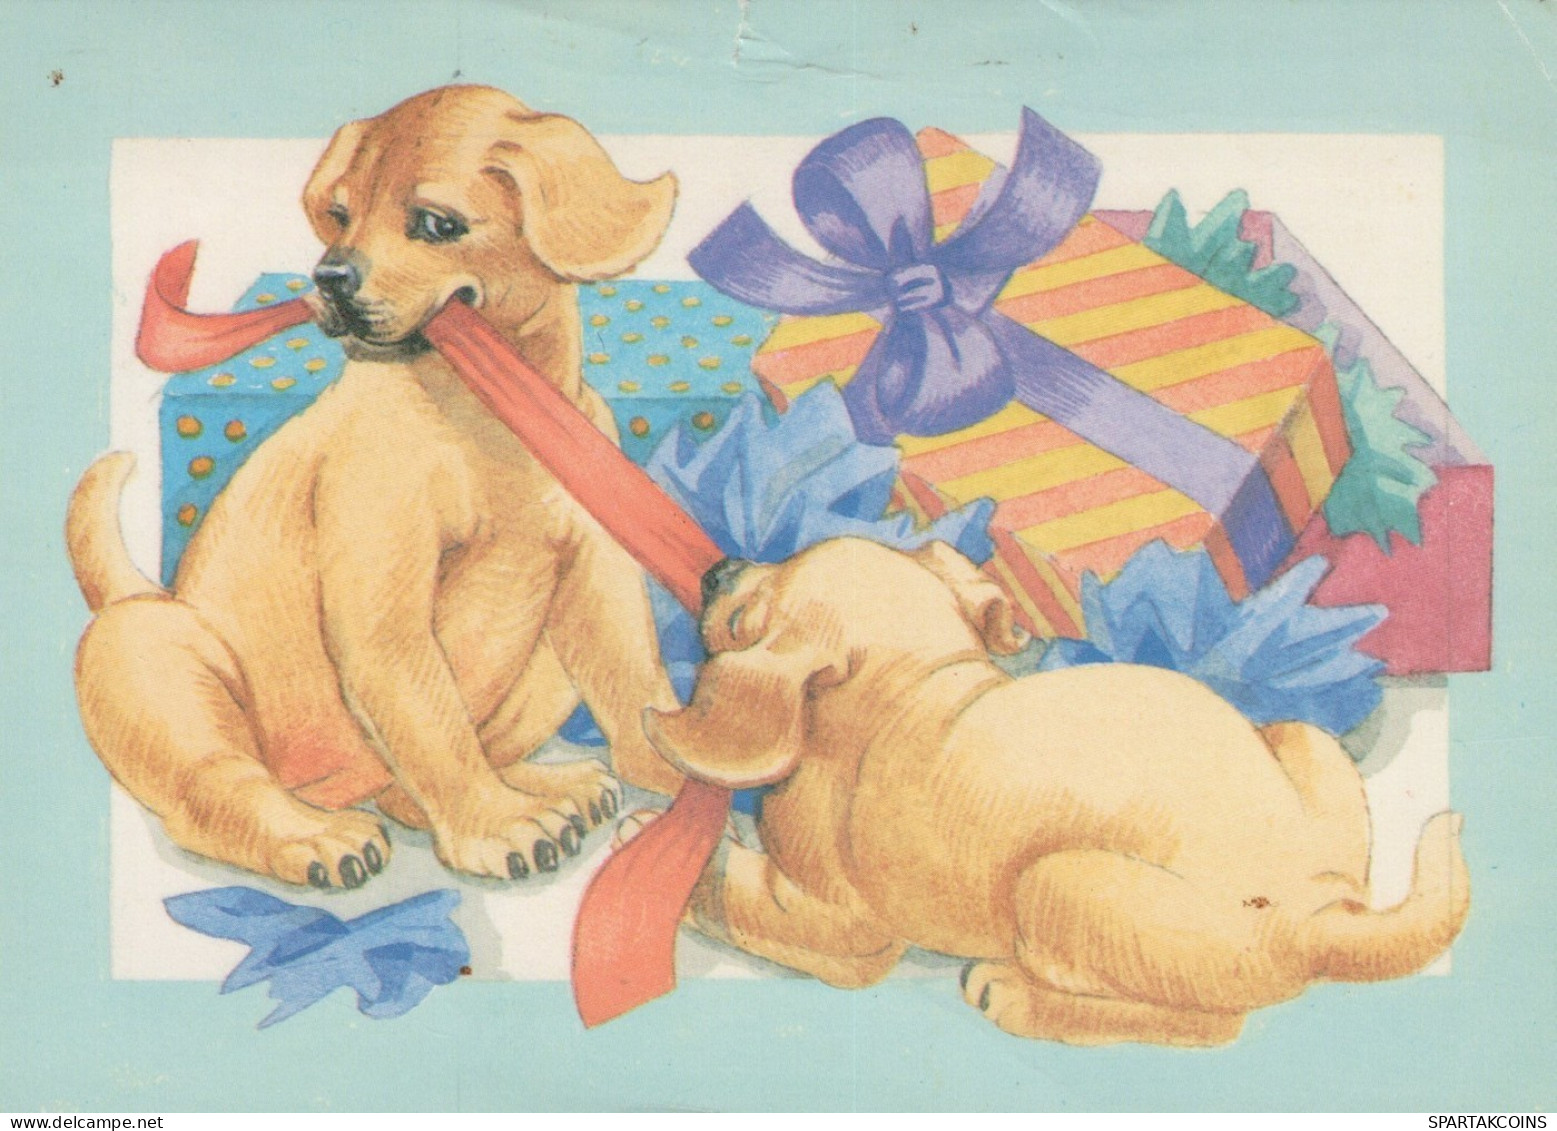 CANE Animale Vintage Cartolina CPSM #PAN664.IT - Chiens